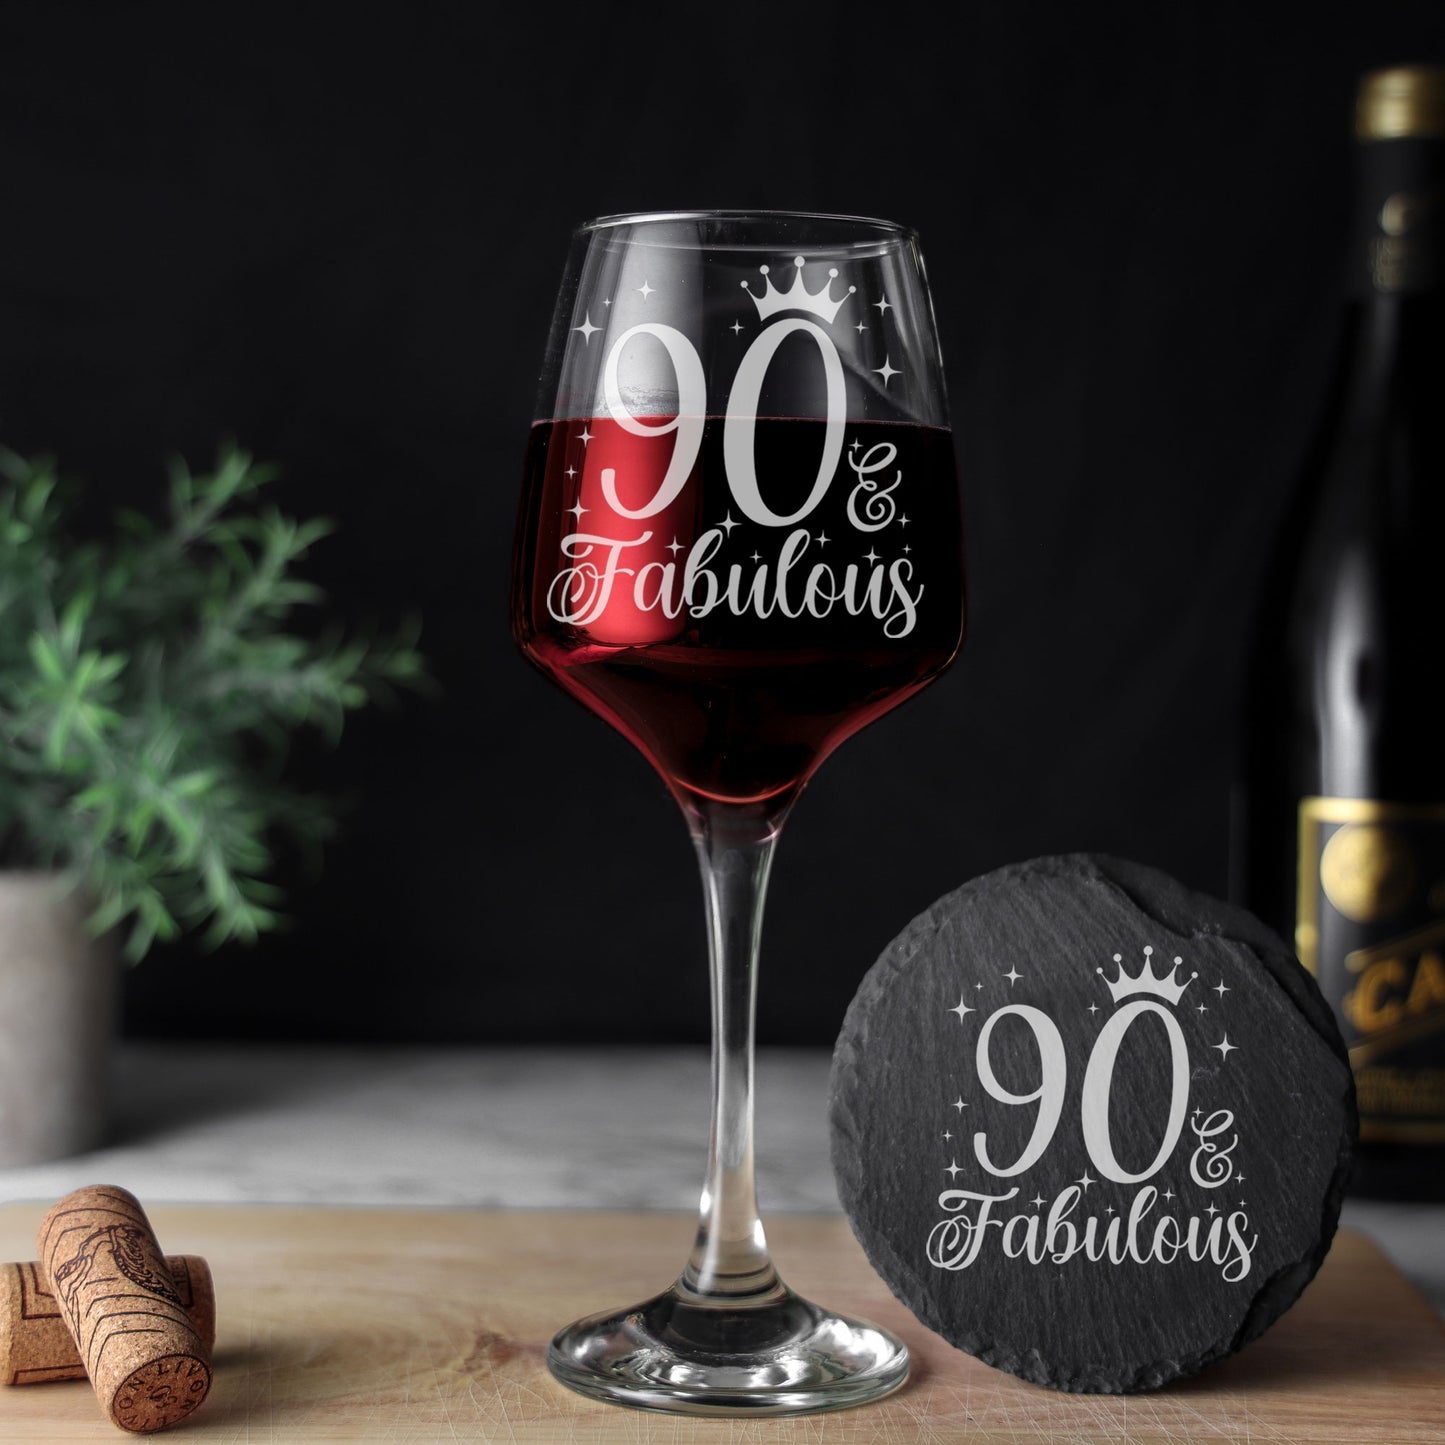 90 & Fabulous 90th Birthday Gift Engraved Wine Glass and/or Coaster Set  - Always Looking Good - Glass & Round Coaster  